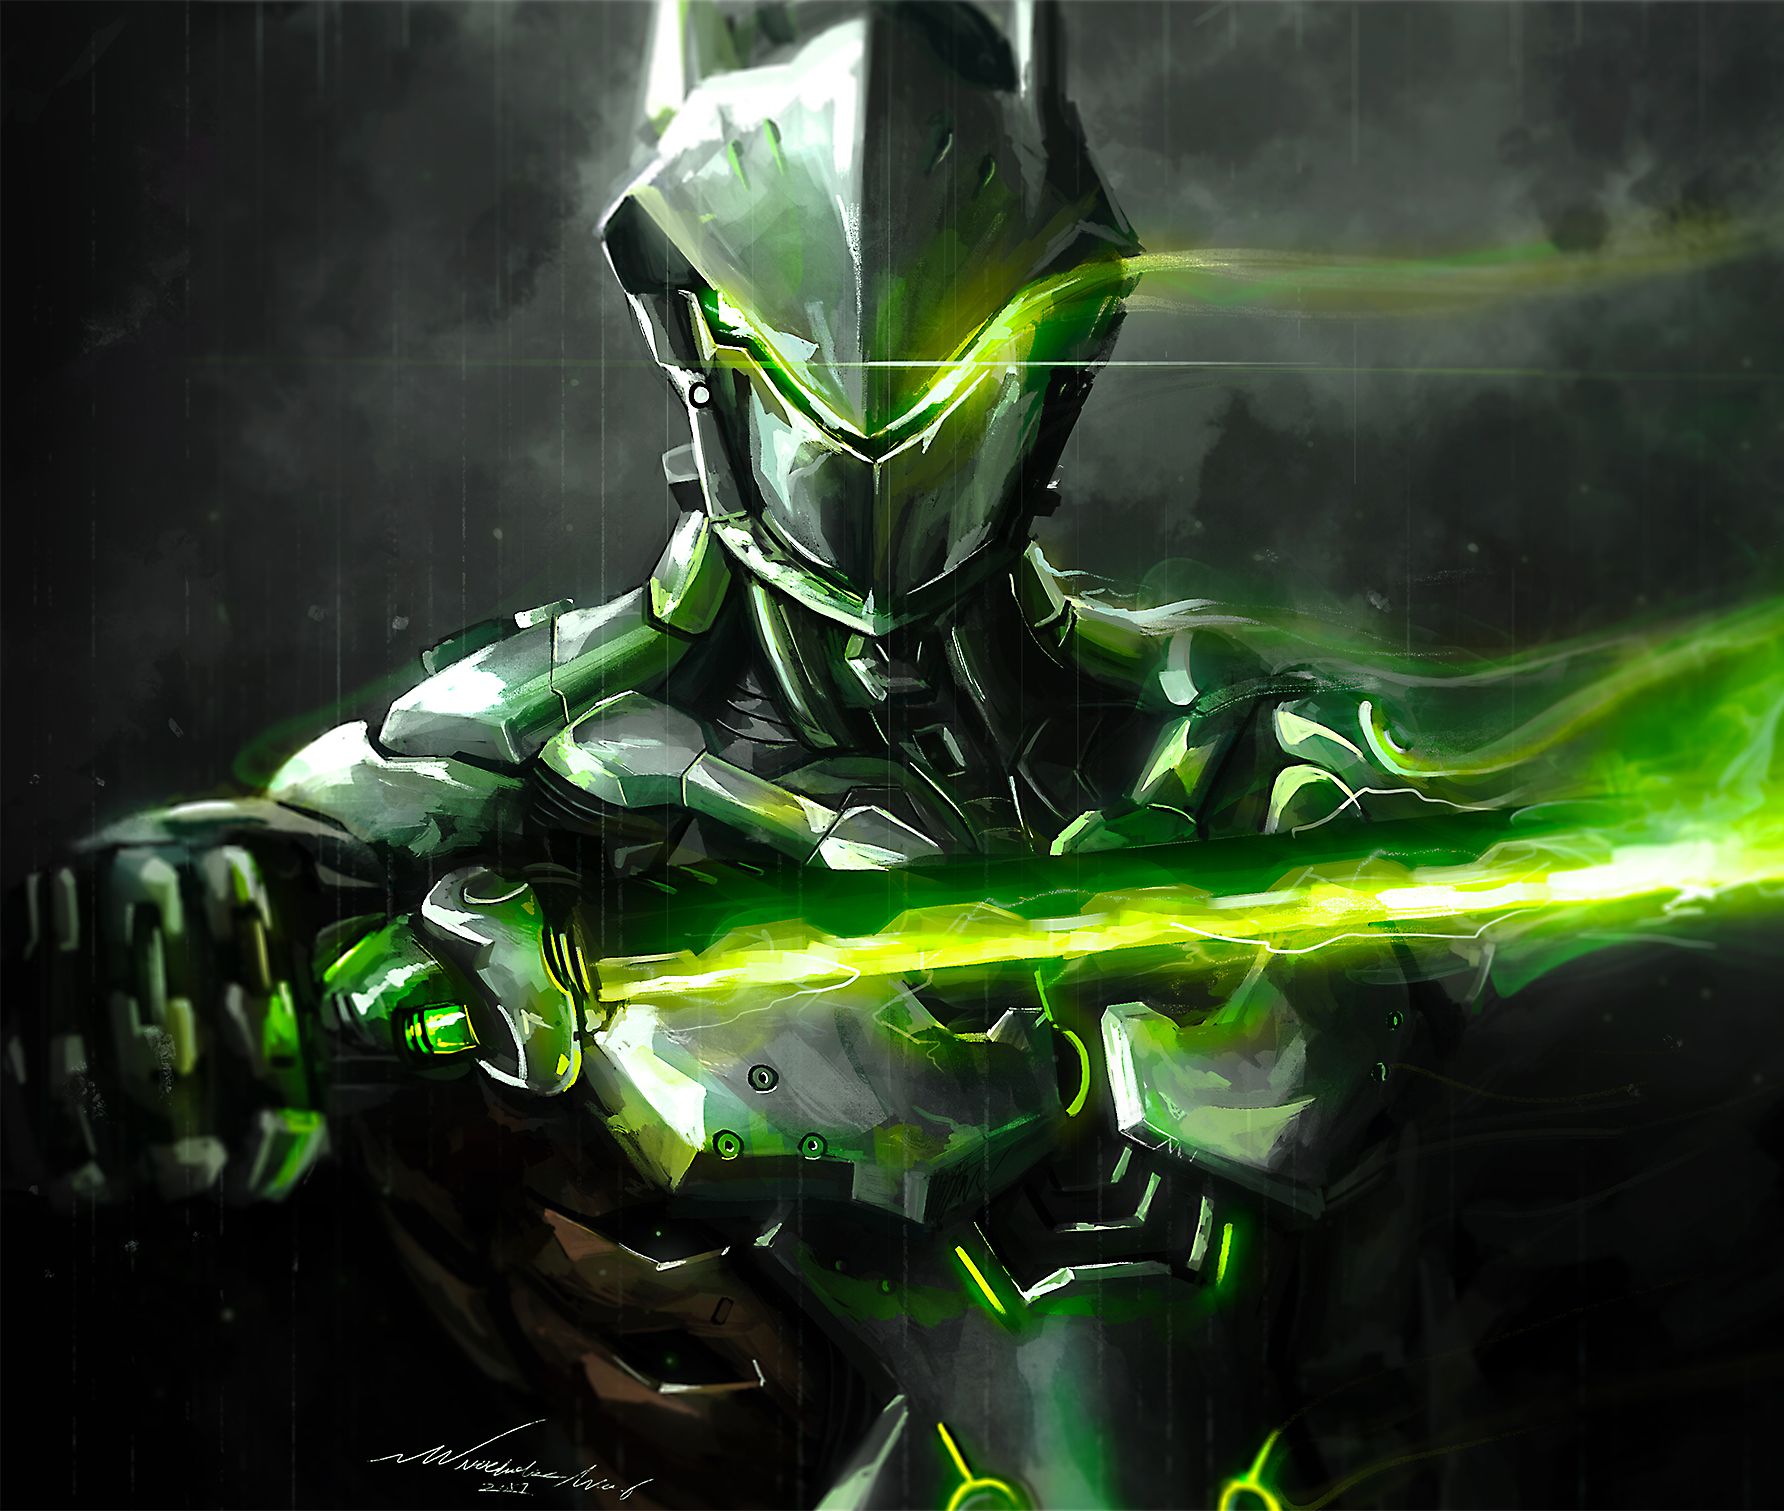 Genji Overwatch wallpapers for desktop download free Genji Overwatch  pictures and backgrounds for PC  moborg